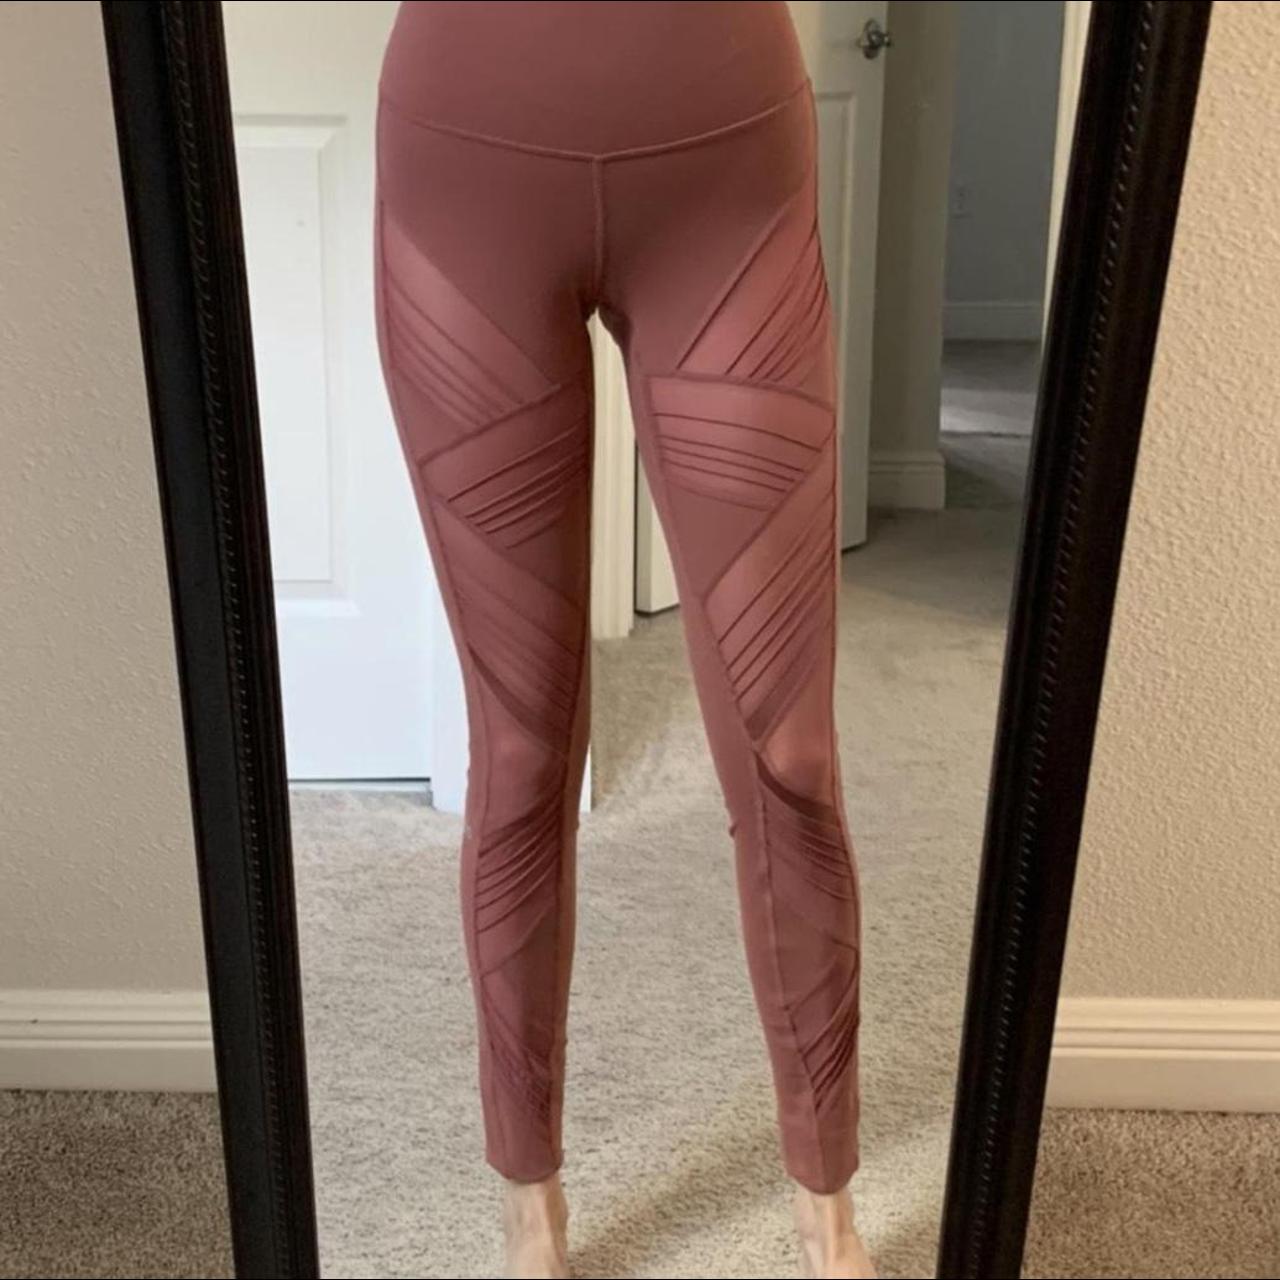 Alo yoga leggings red/pinkish color! Only worn a few - Depop